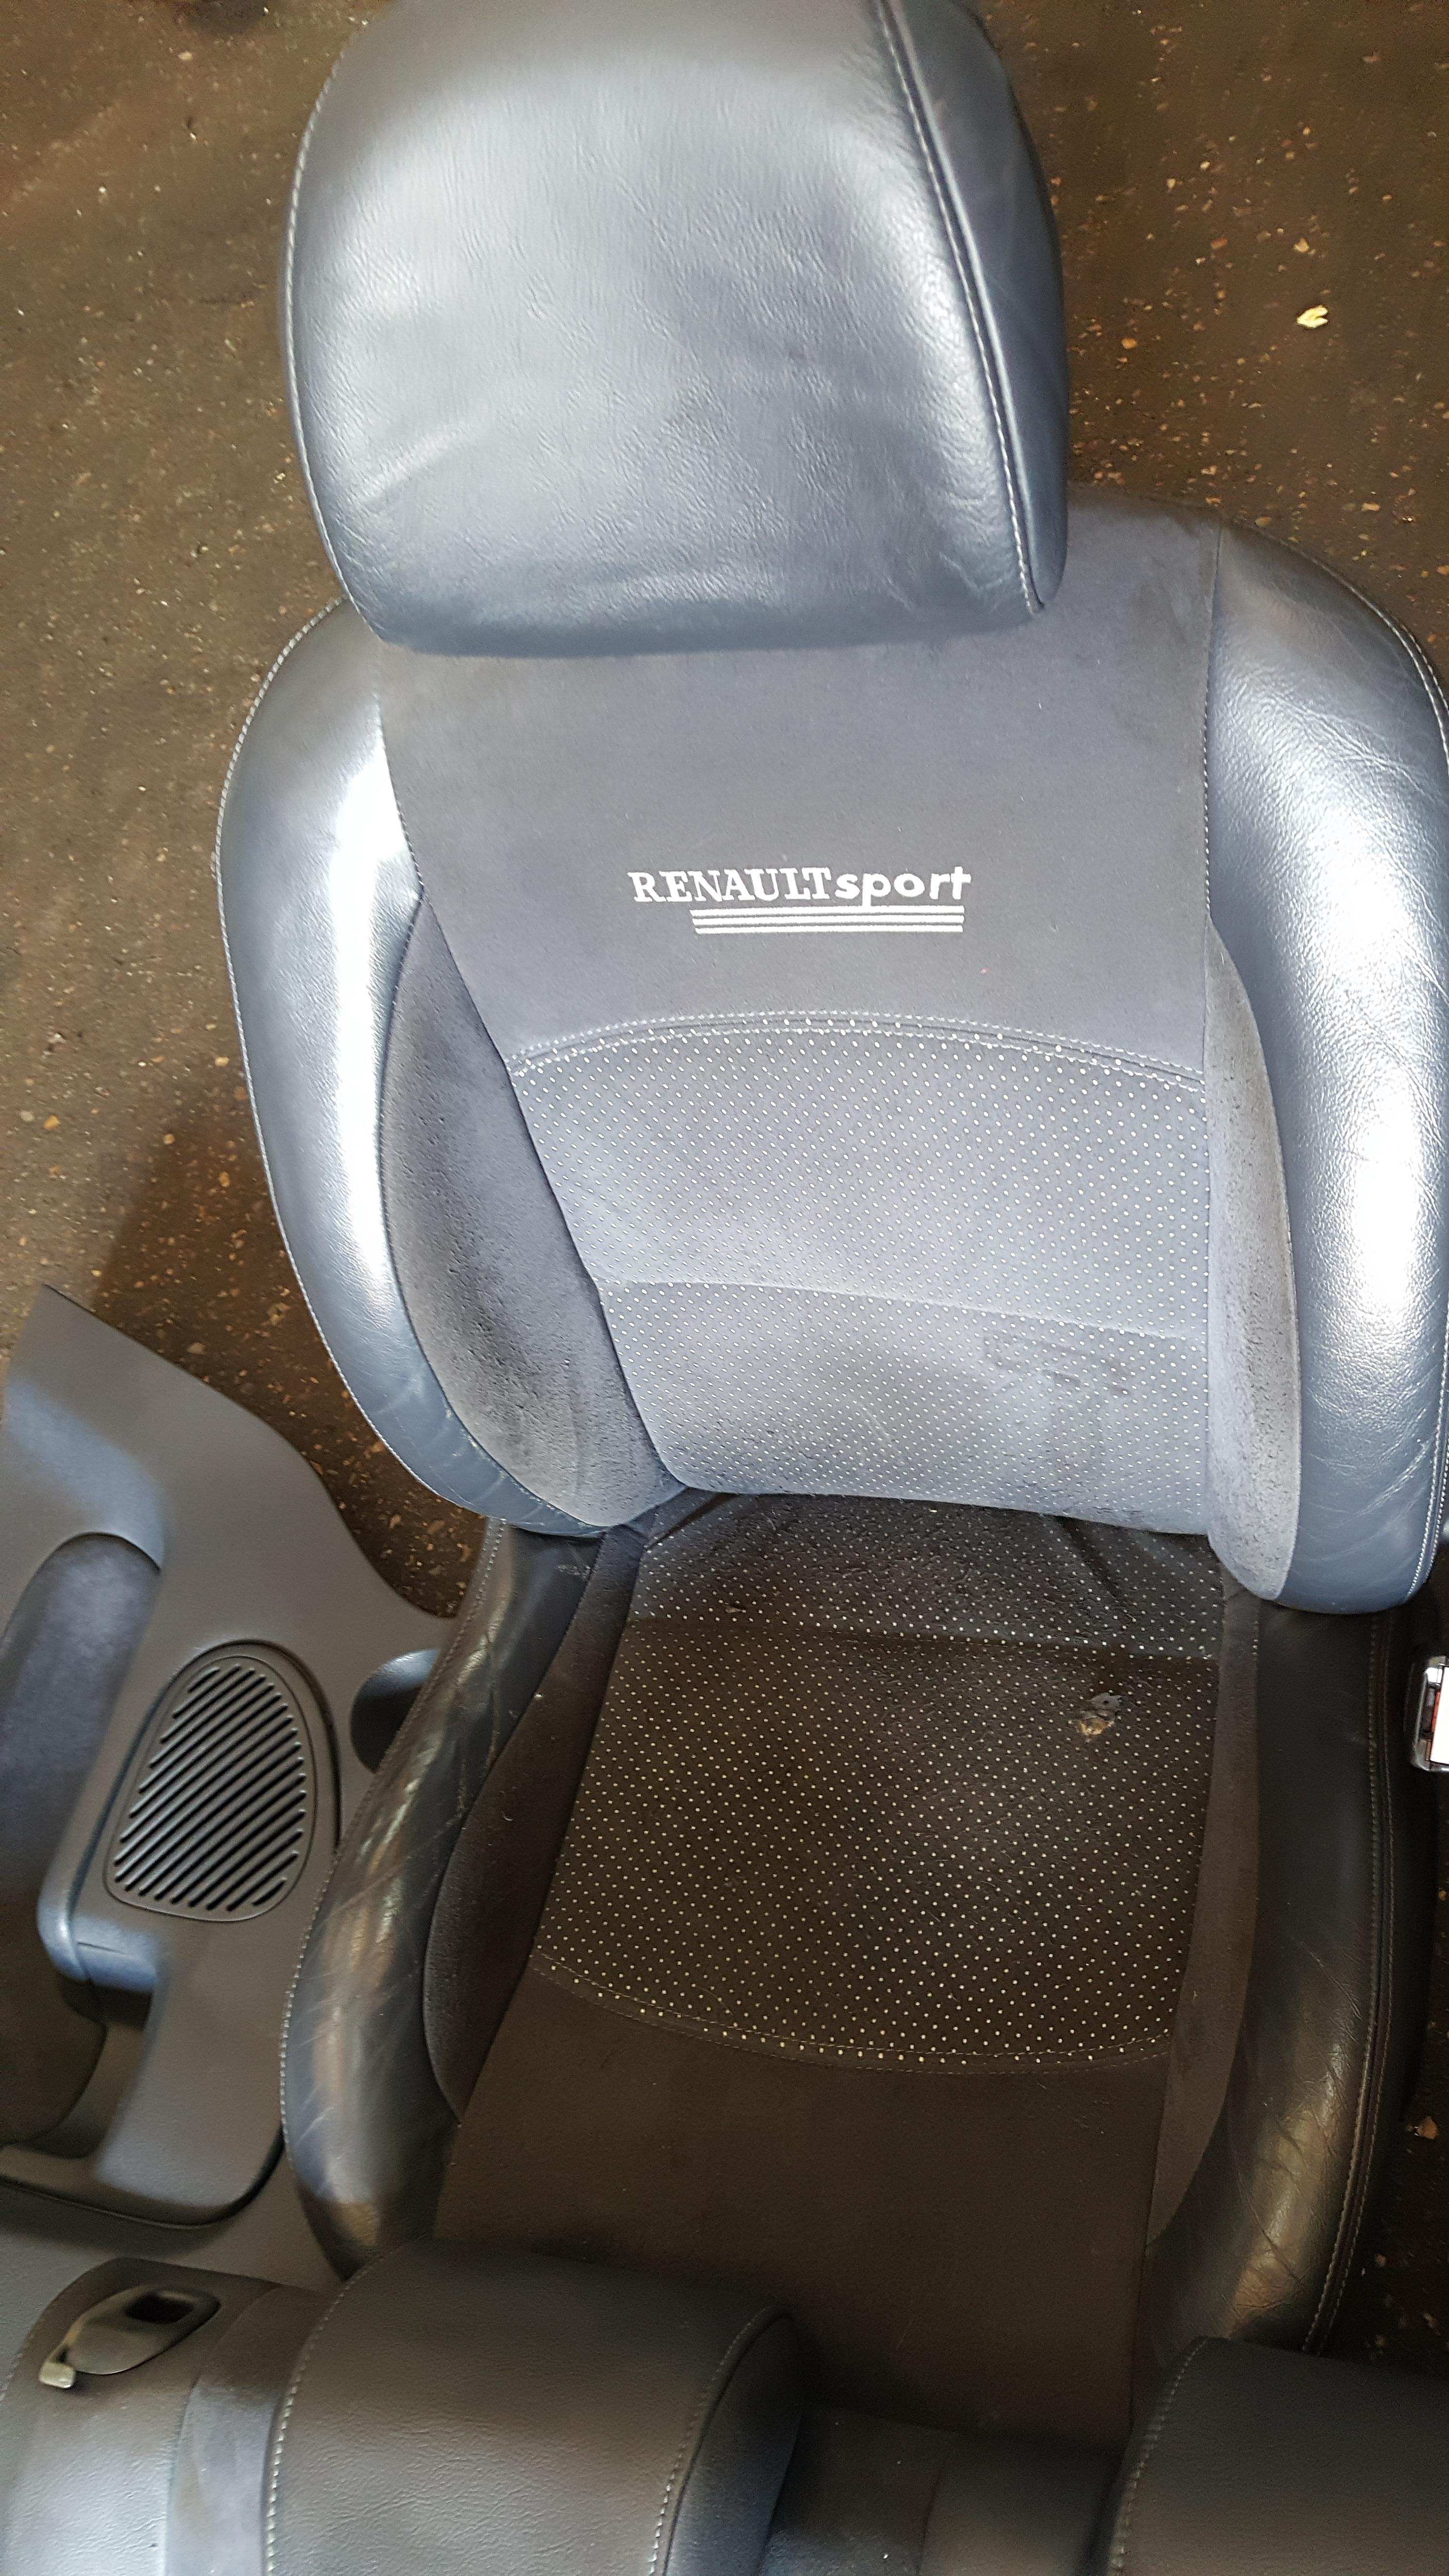 Renault Clio Sport MK2 2001-2006 172 182 Chairs Seats Half Leather + Cards